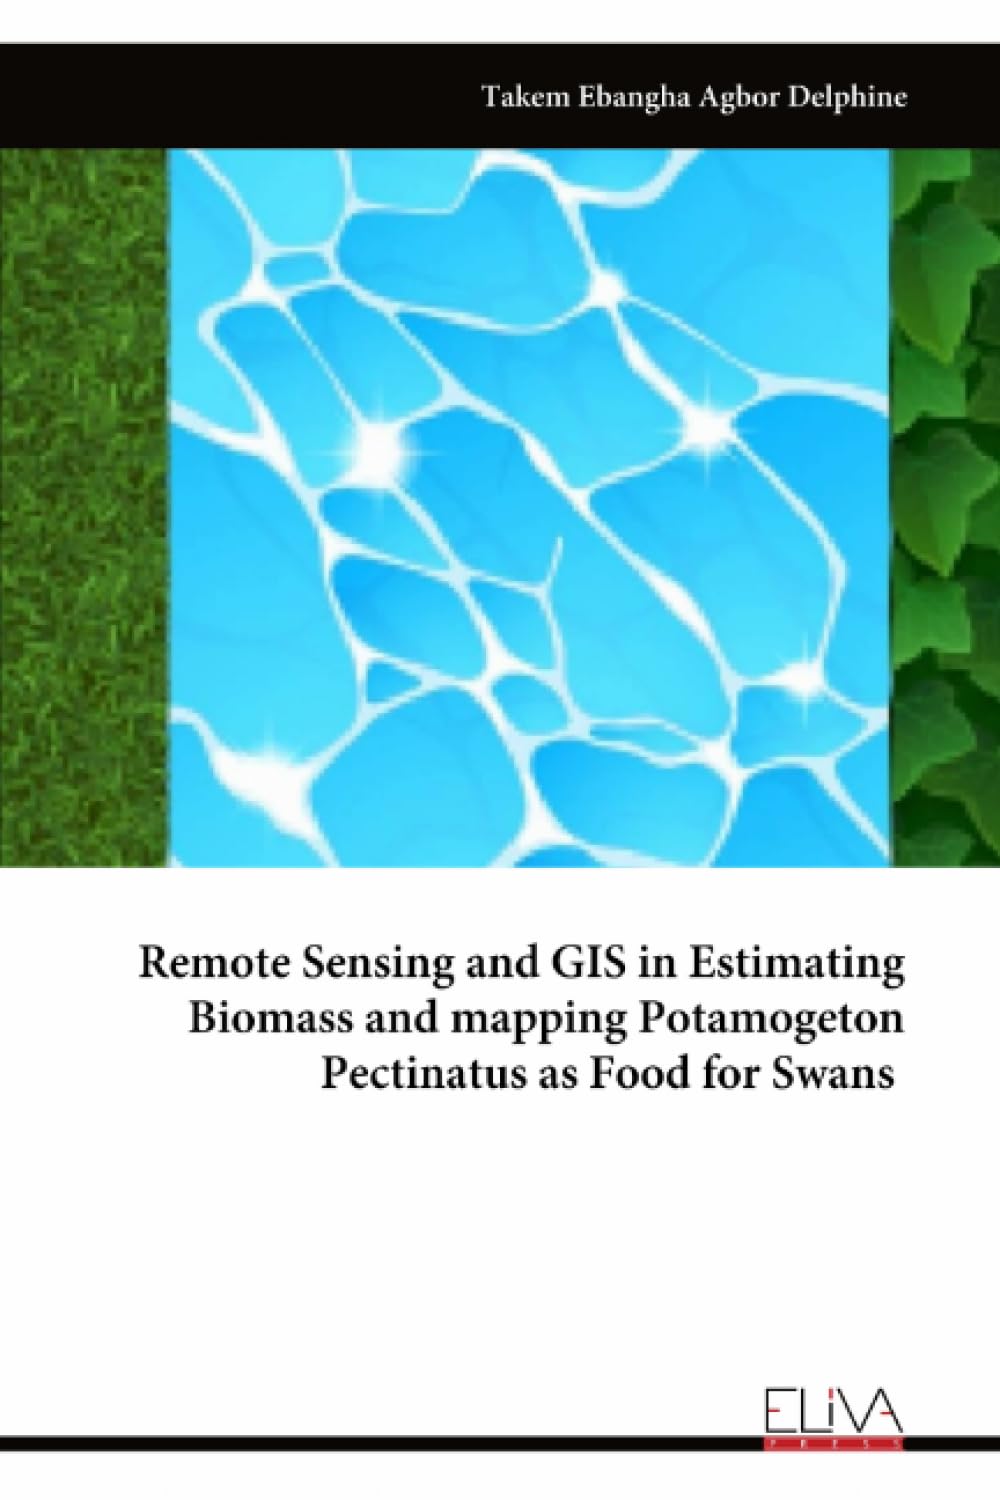 Remote Sensing and GIS in Estimating Biomass and mapping Potamogeton Pectinatus as Food for Swans